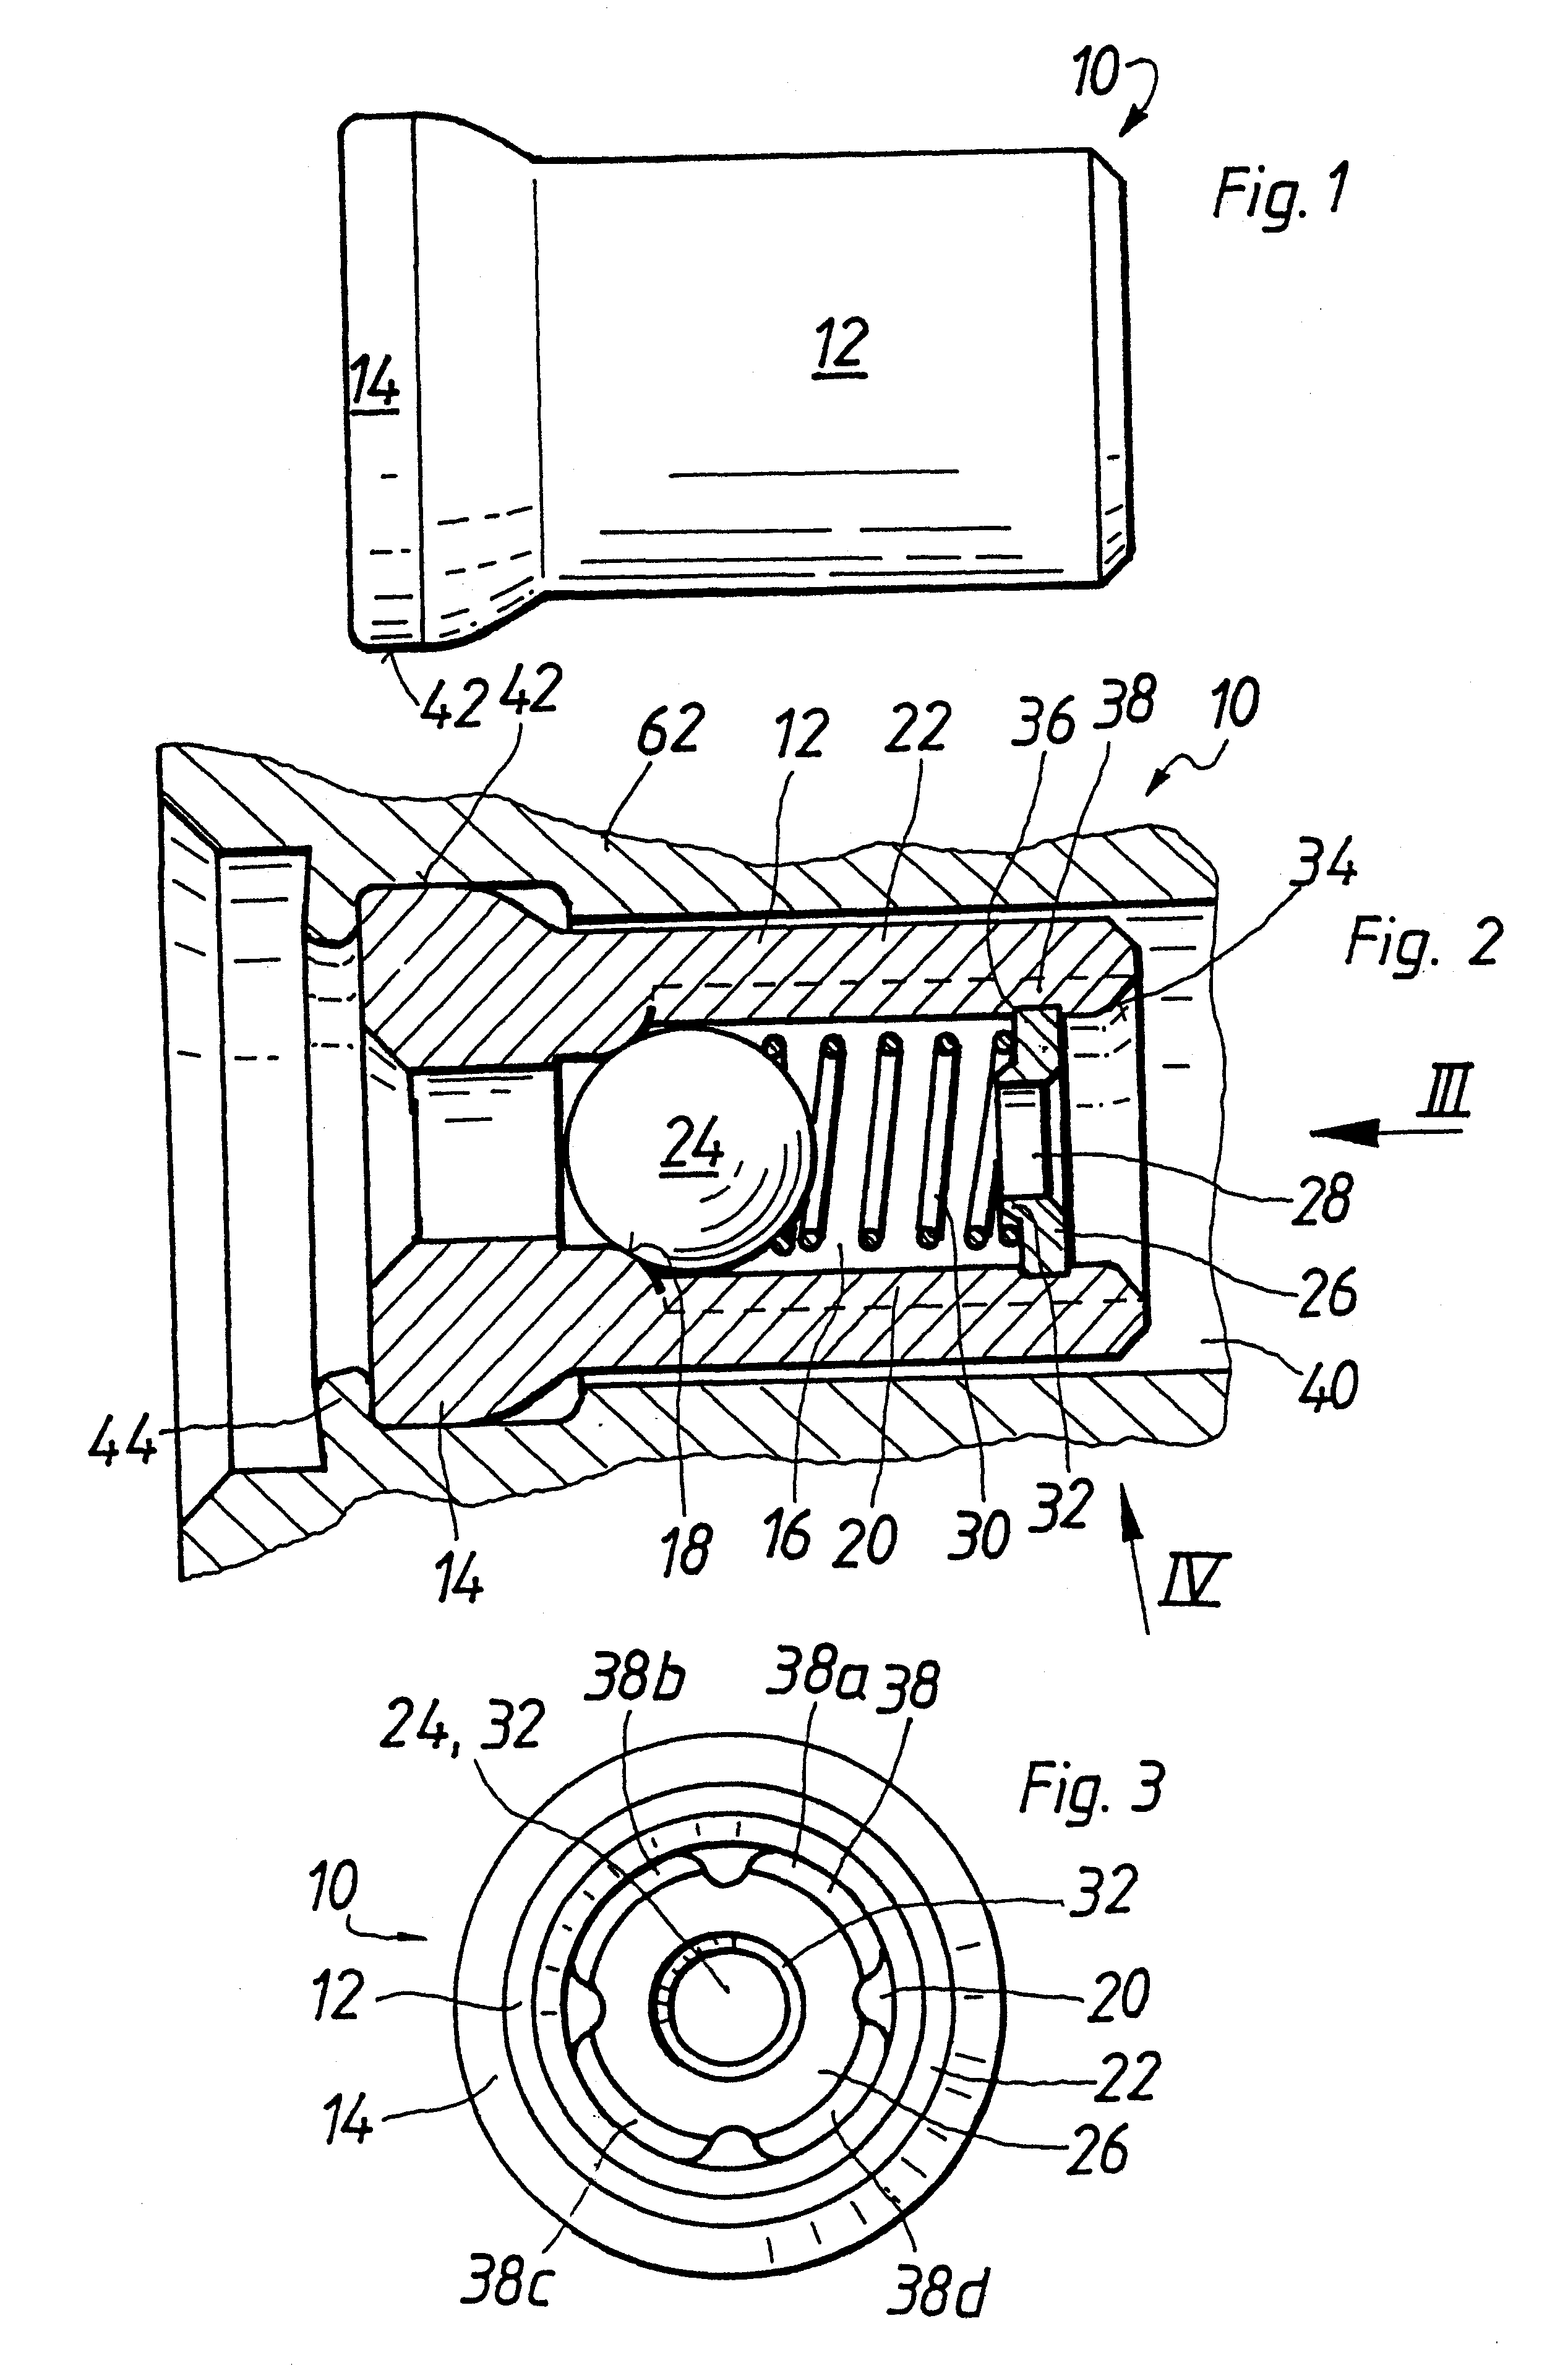 Check valve for a piston pump in a fluid circulation system